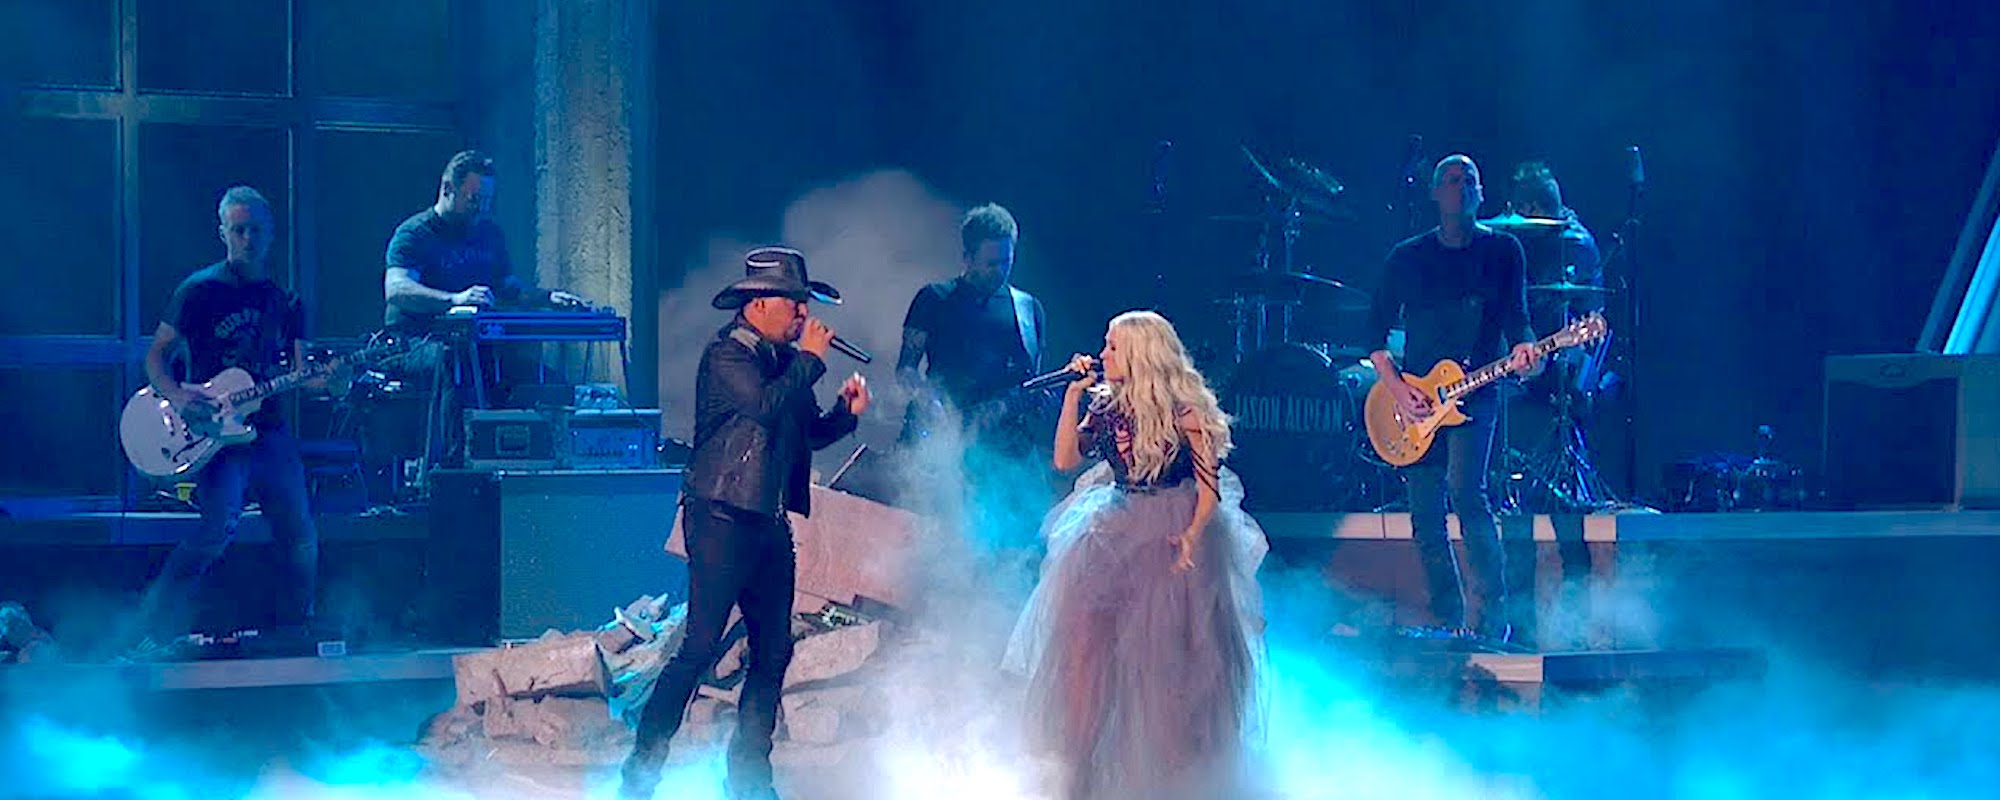 Carrie Underwood and Jason Aldean Debut Live Performance of “If I Didn’t Love You” at 2021 CMA Awards